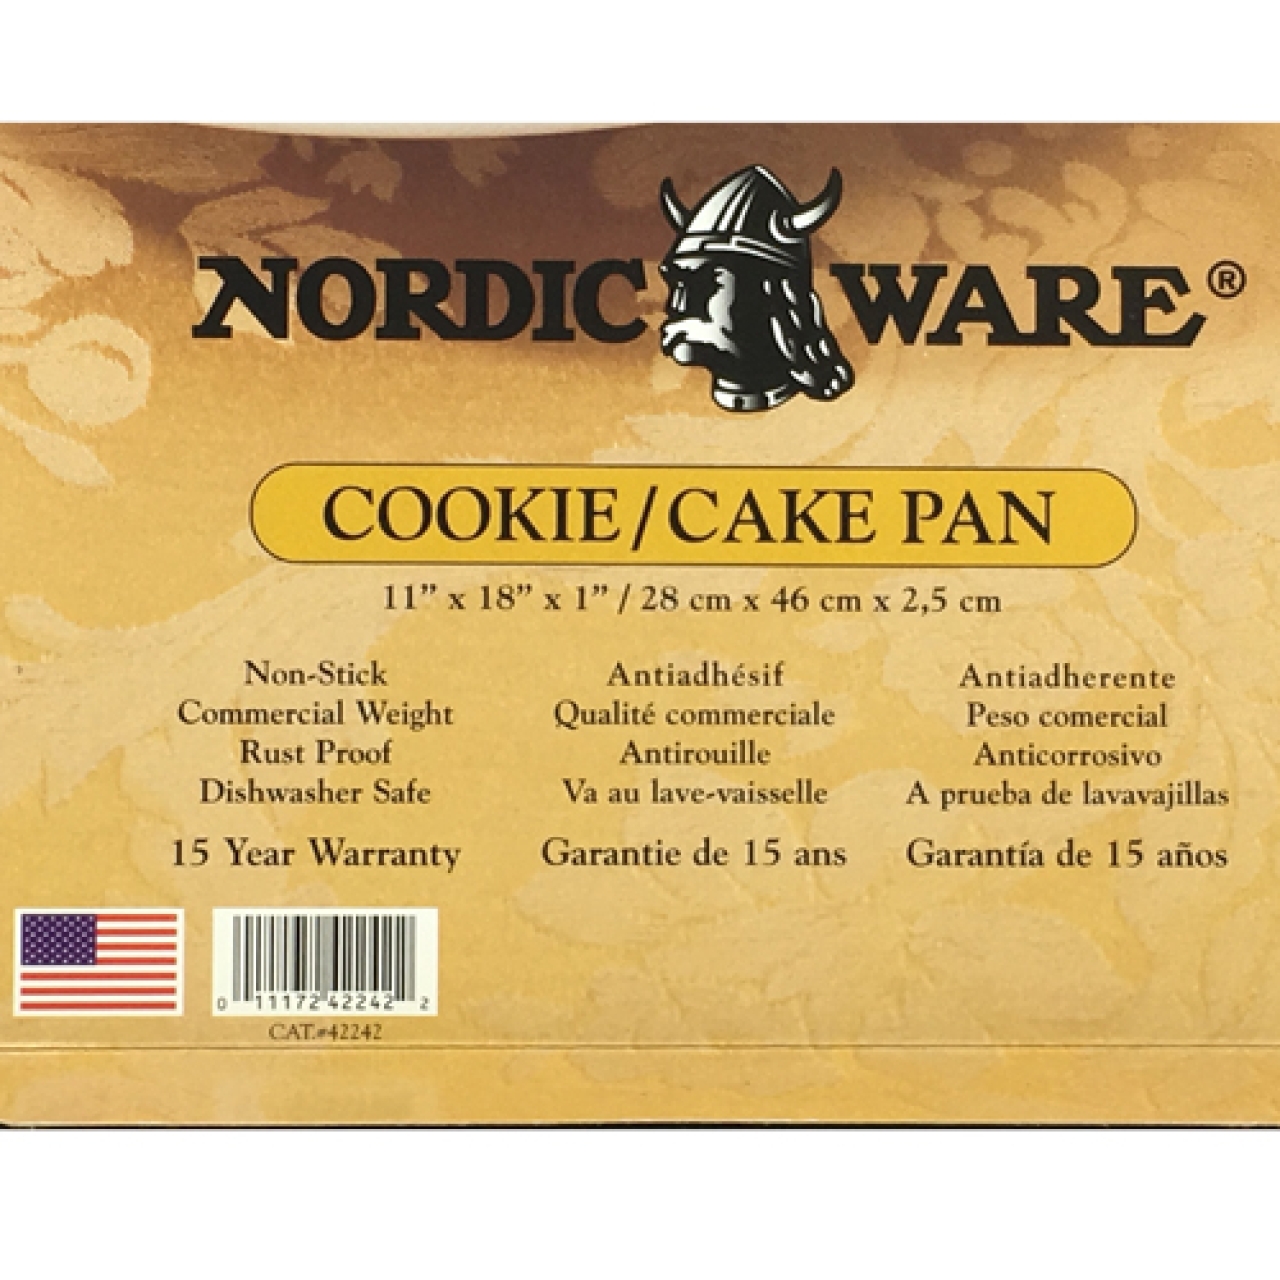 Nordic Ware Jelly Roll Pan 28 x 46 cm